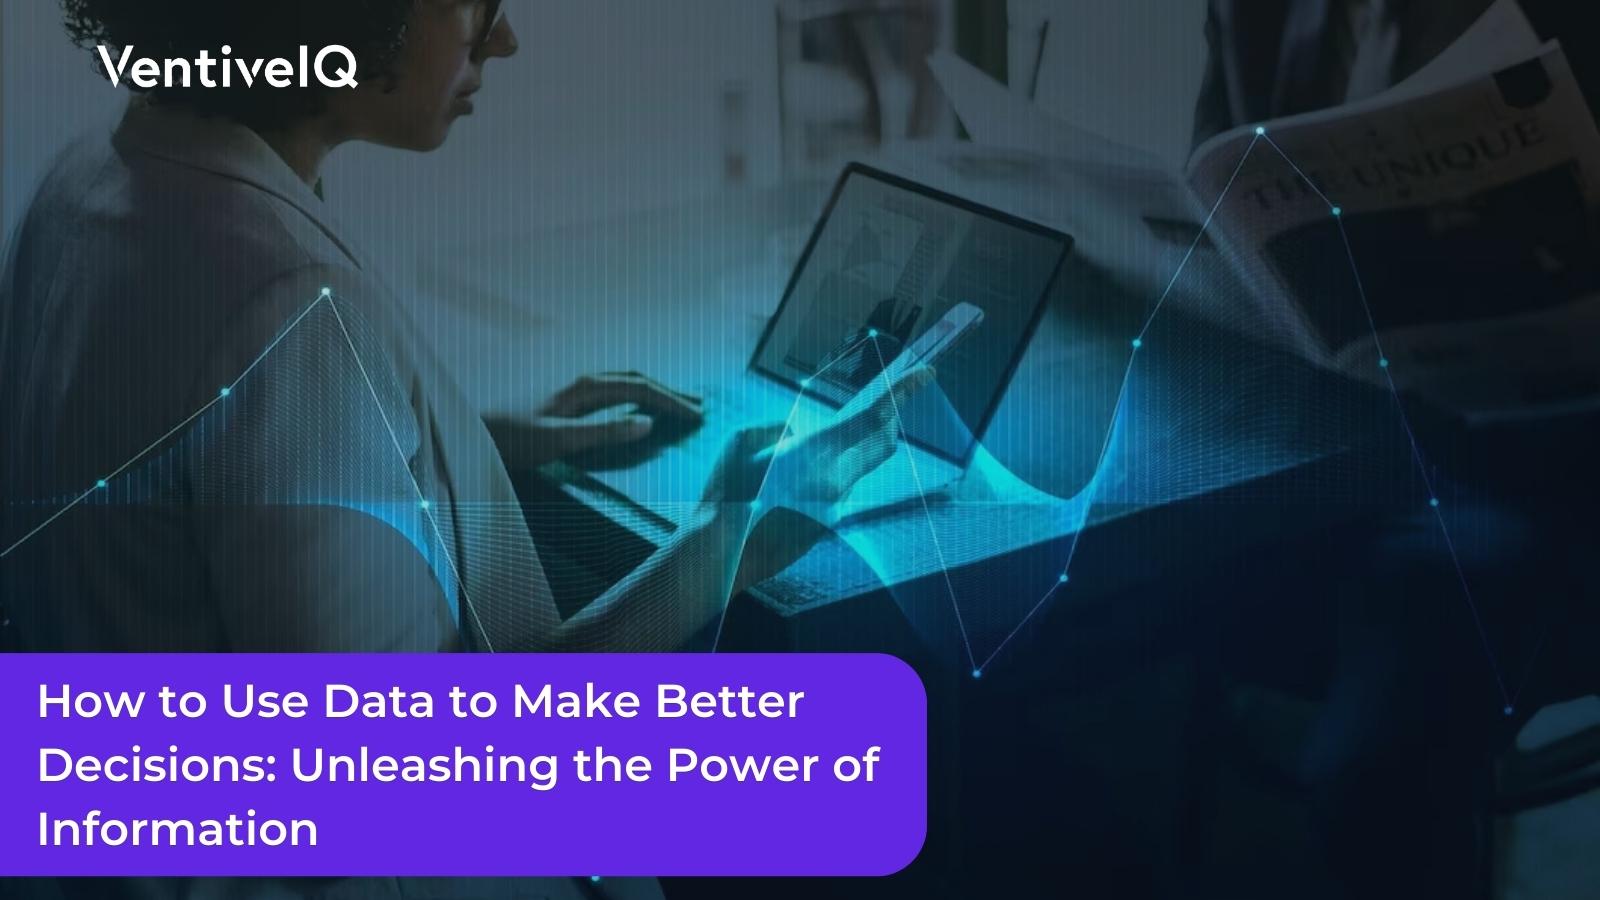 How to Use Data to Make Better Decisions: Unleashing the Power of Information